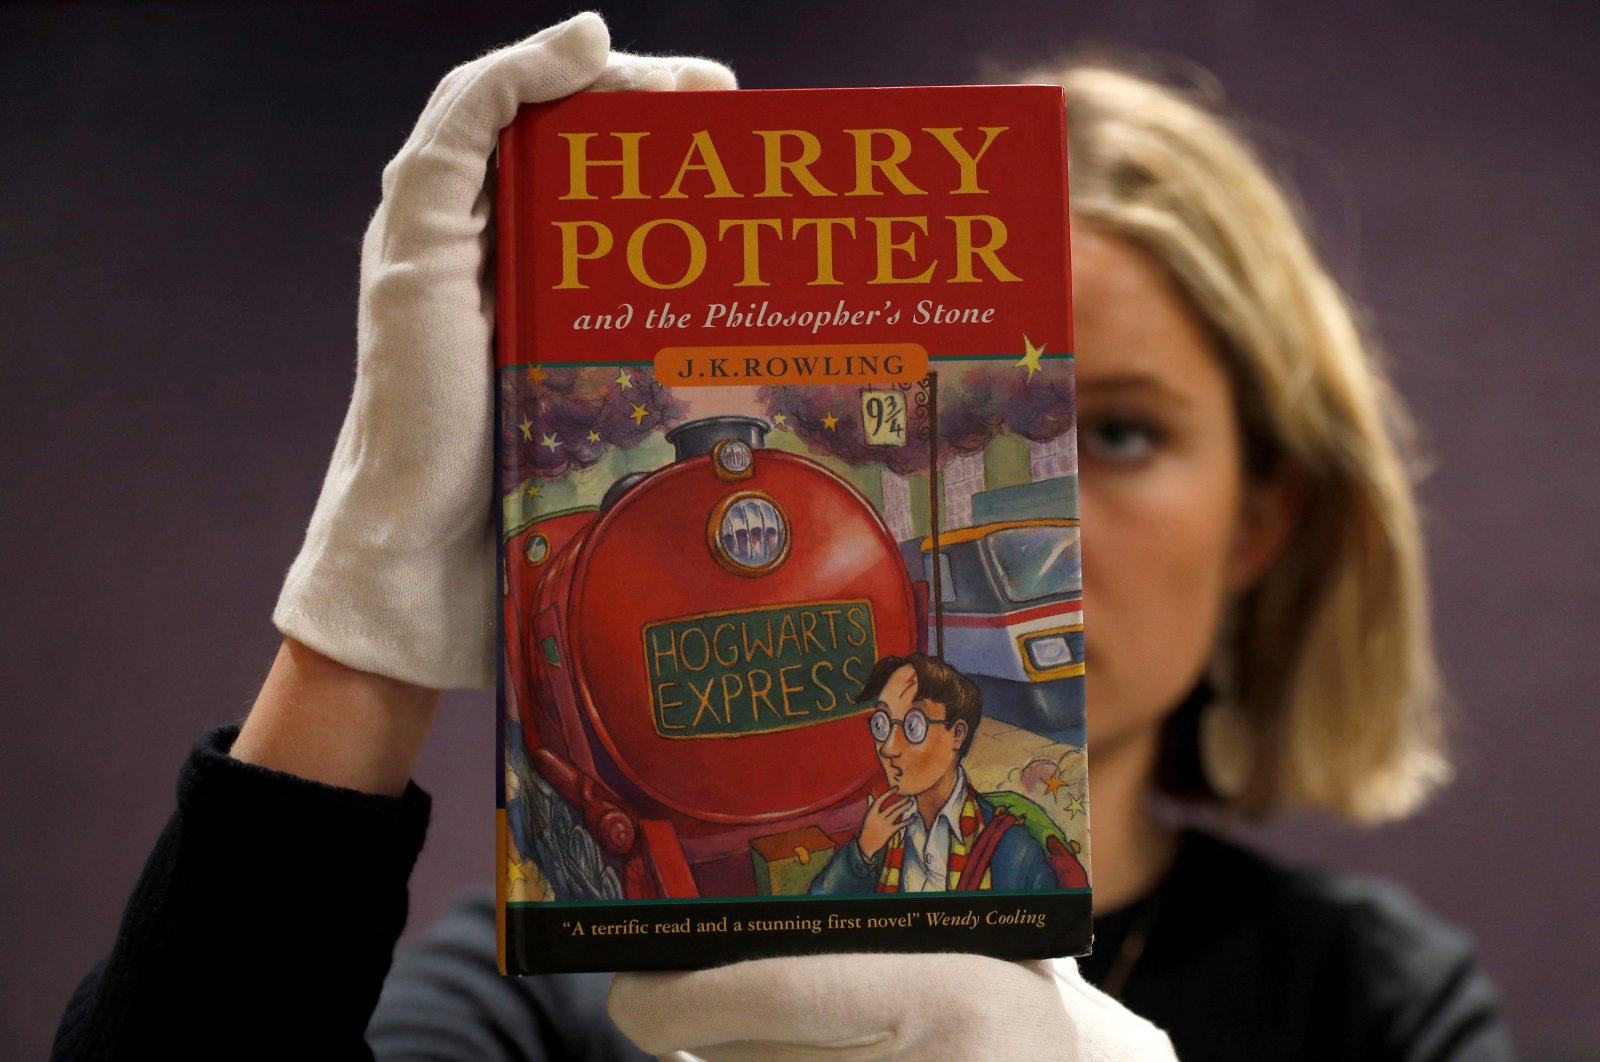 One of the first-ever copies of &quot;Harry Potter and the Philosopher&#039;s Stone&quot; by J.K. Rowling, is held by a staff member at Bonhams auctioneers, ahead of the Fine Books, Manuscripts, Atlases and Historical Photographs sale in London, Britain March 27, 2019.  (REUTERS Photo)